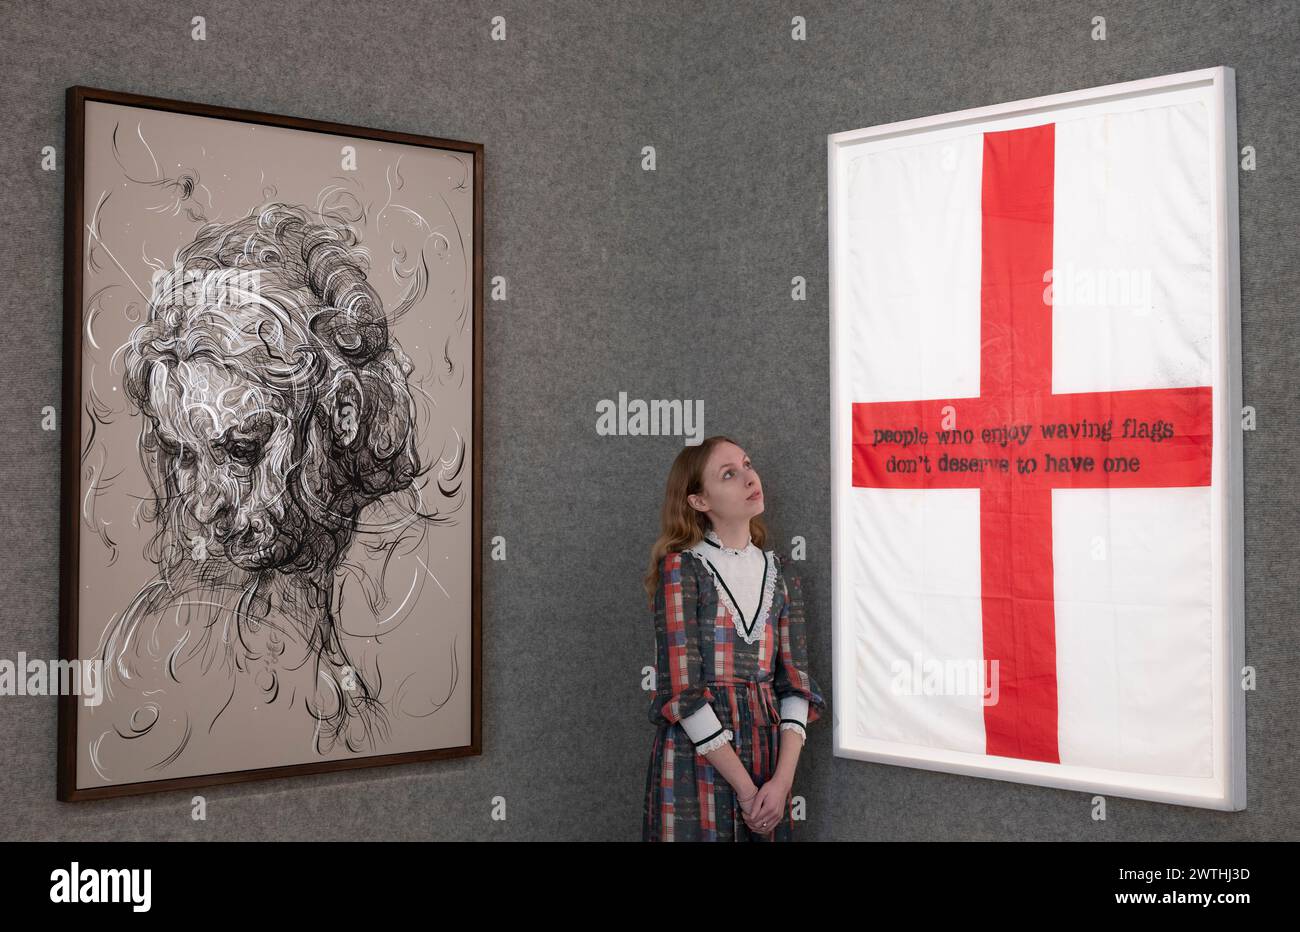 Bonhams, London, UK. 18th Mar, 2024. Bonhams Post War and Contemporary Art sale takes place on 21 March. Highlights include: (left) Glen Brown CBE, (b. 1966), The Music of the Mountains, 2016. India ink and acrylic on panel. Estimate £100,000-150,000; (right() Banksy (b. 1975), People Who Enjoy Waving Flags Don't Deserve To Have One, 2003. Spray paint on found St. George's Cross Flag. Estimate £200,000-300,000. Credit: Malcolm Park/Alamy Live News Stock Photo